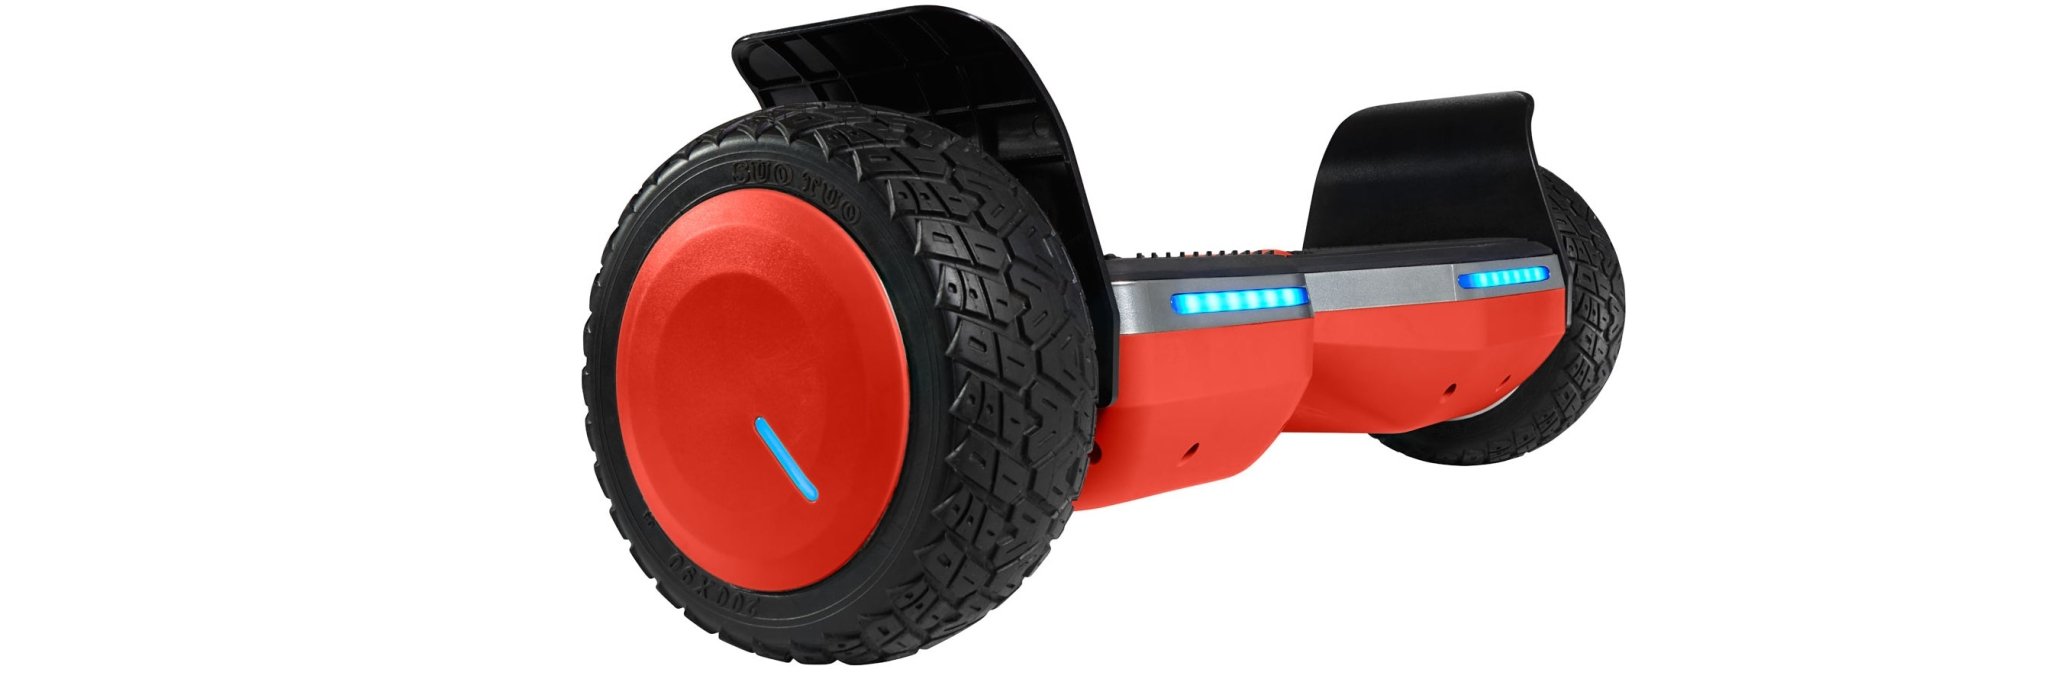  Trinity Max Hoverboard for Kids Ages 6-12, 6.5 LED